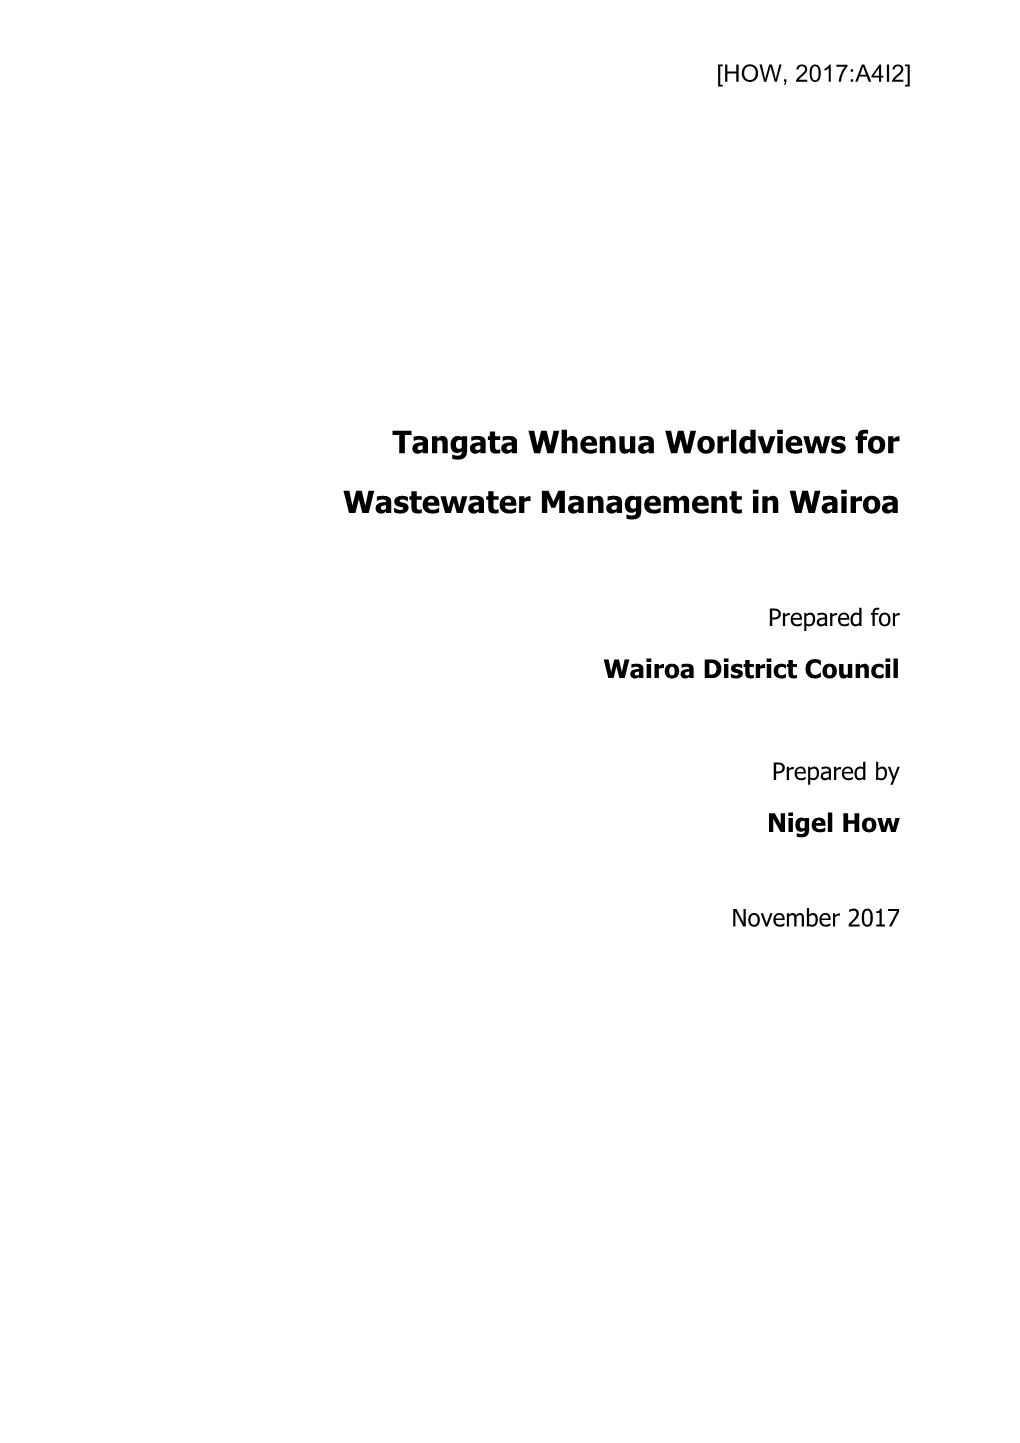 Tangata Whenua Worldviews for Wastewater Management in Wairoa